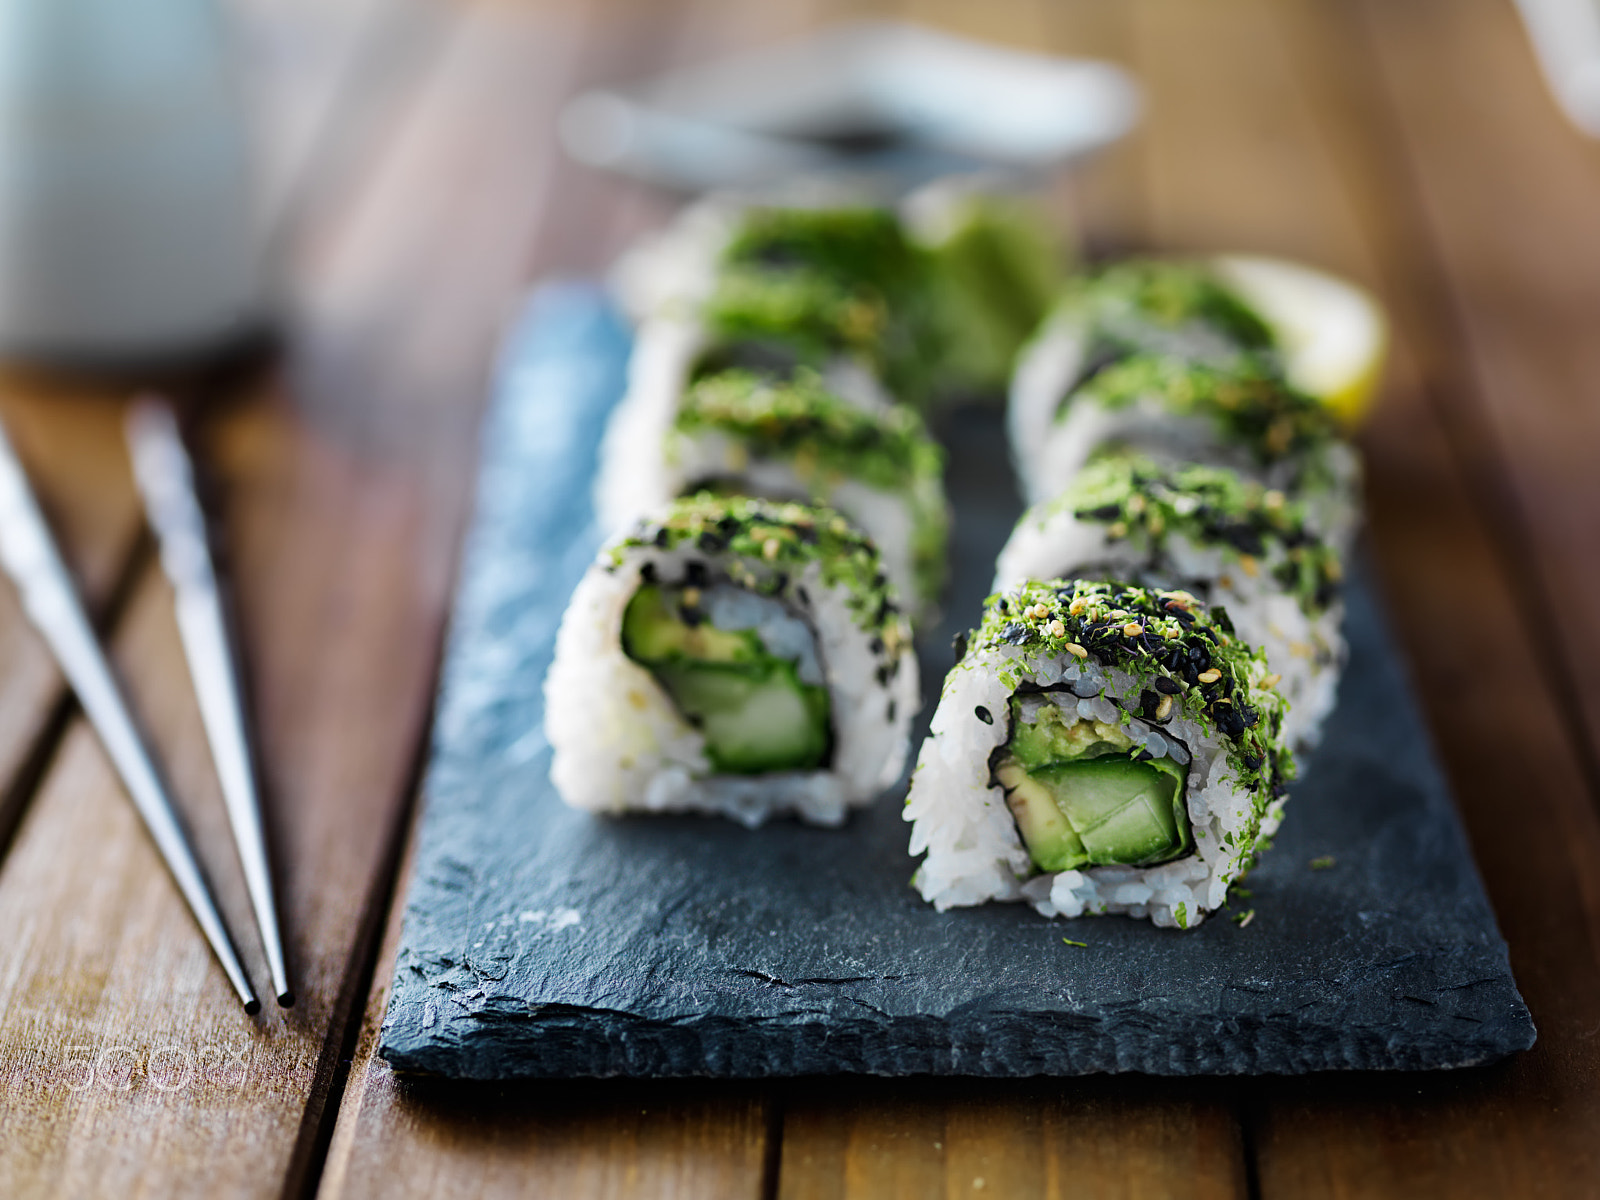 Hasselblad H3DII-39 + HC 120 sample photo. Healthy kale, avocado and cucumber sushi roll on slate serving tray photography